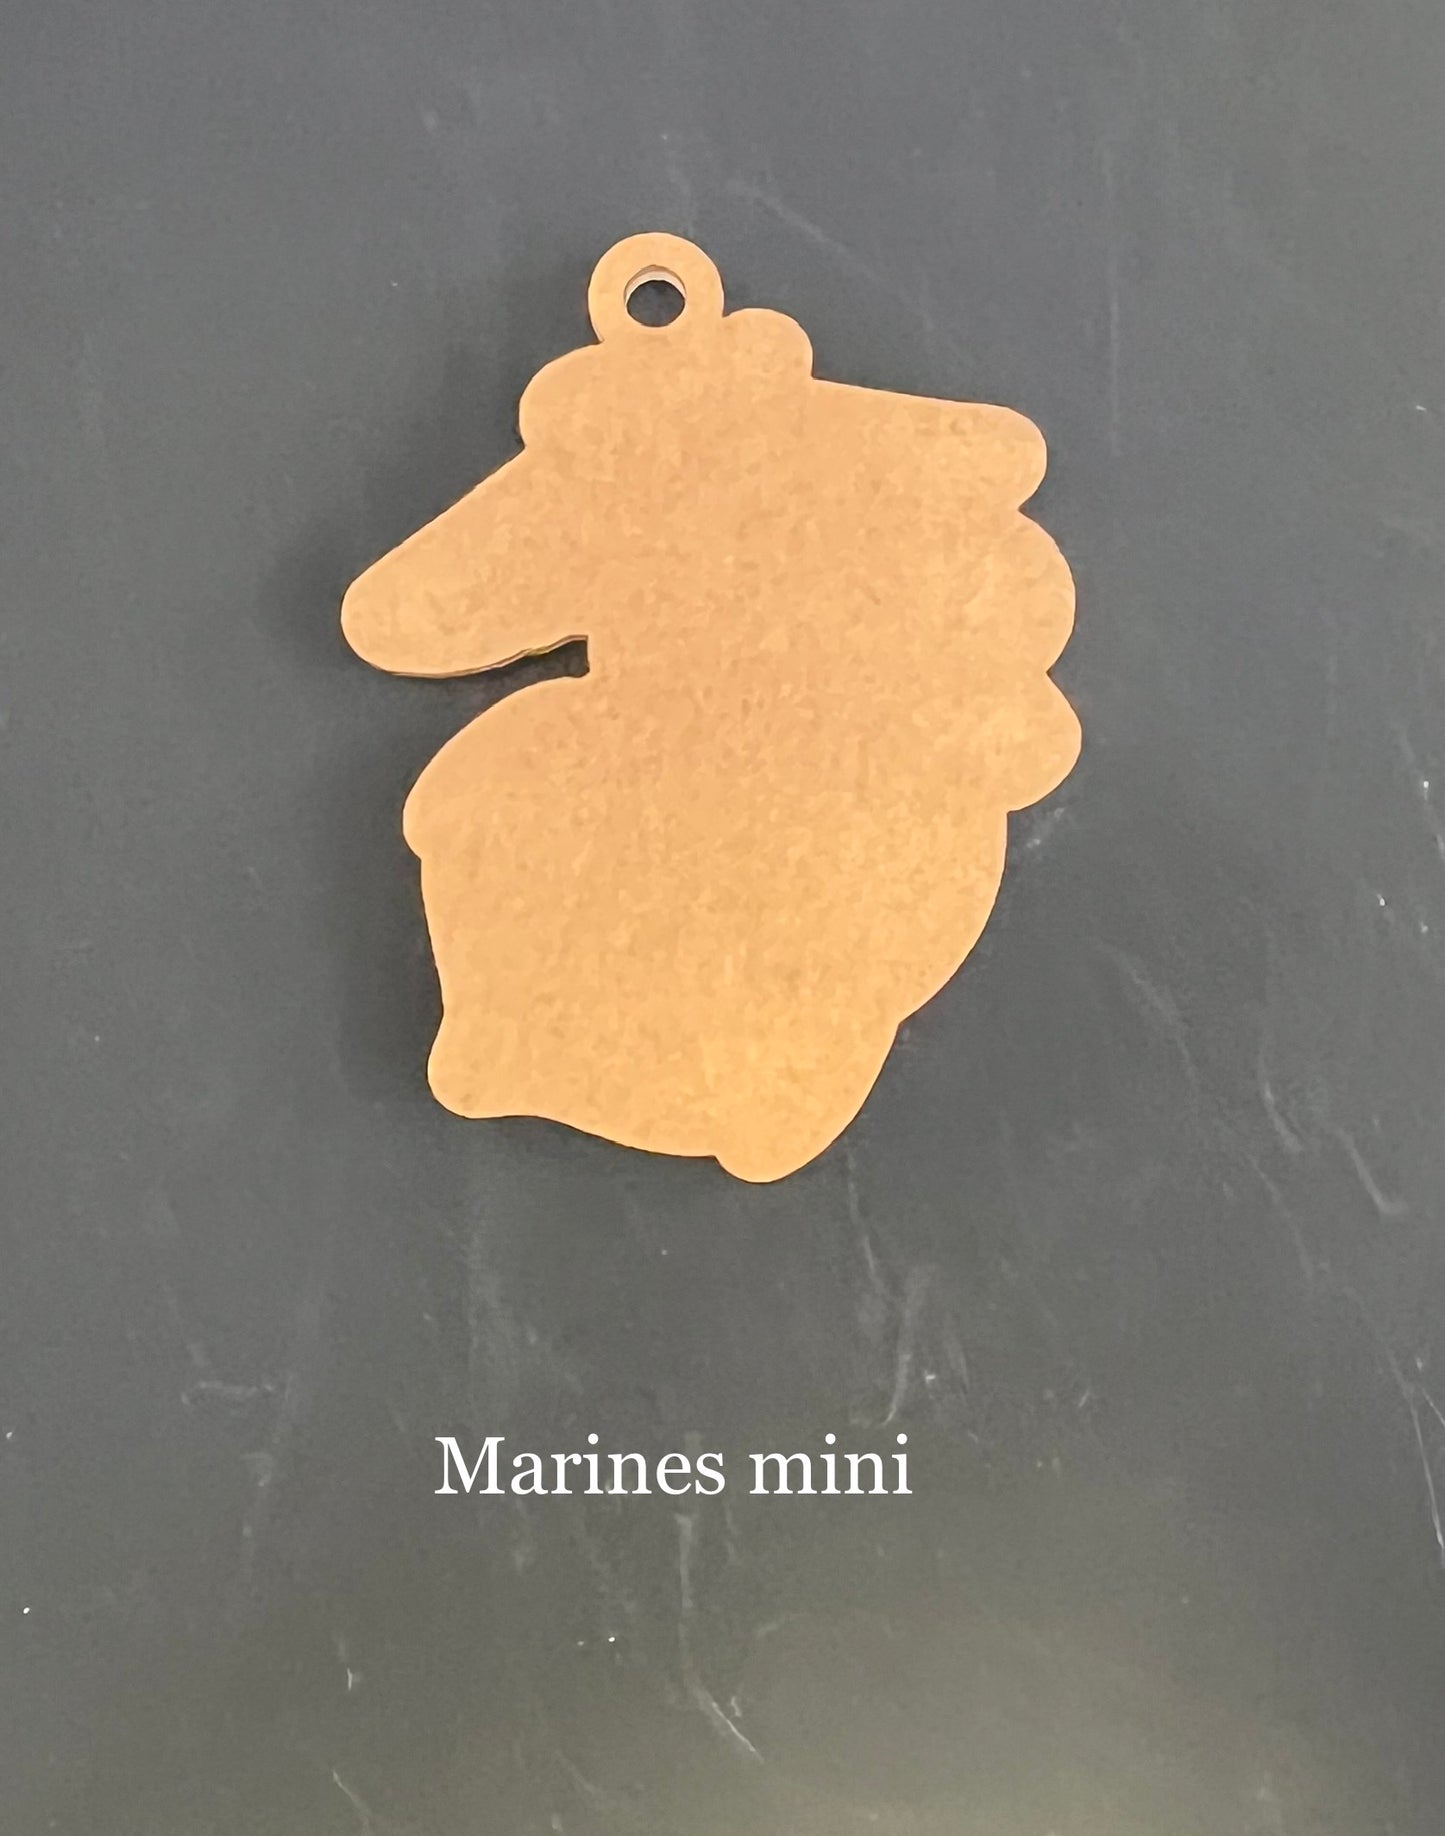 Military/First Responders Keychain Blanks